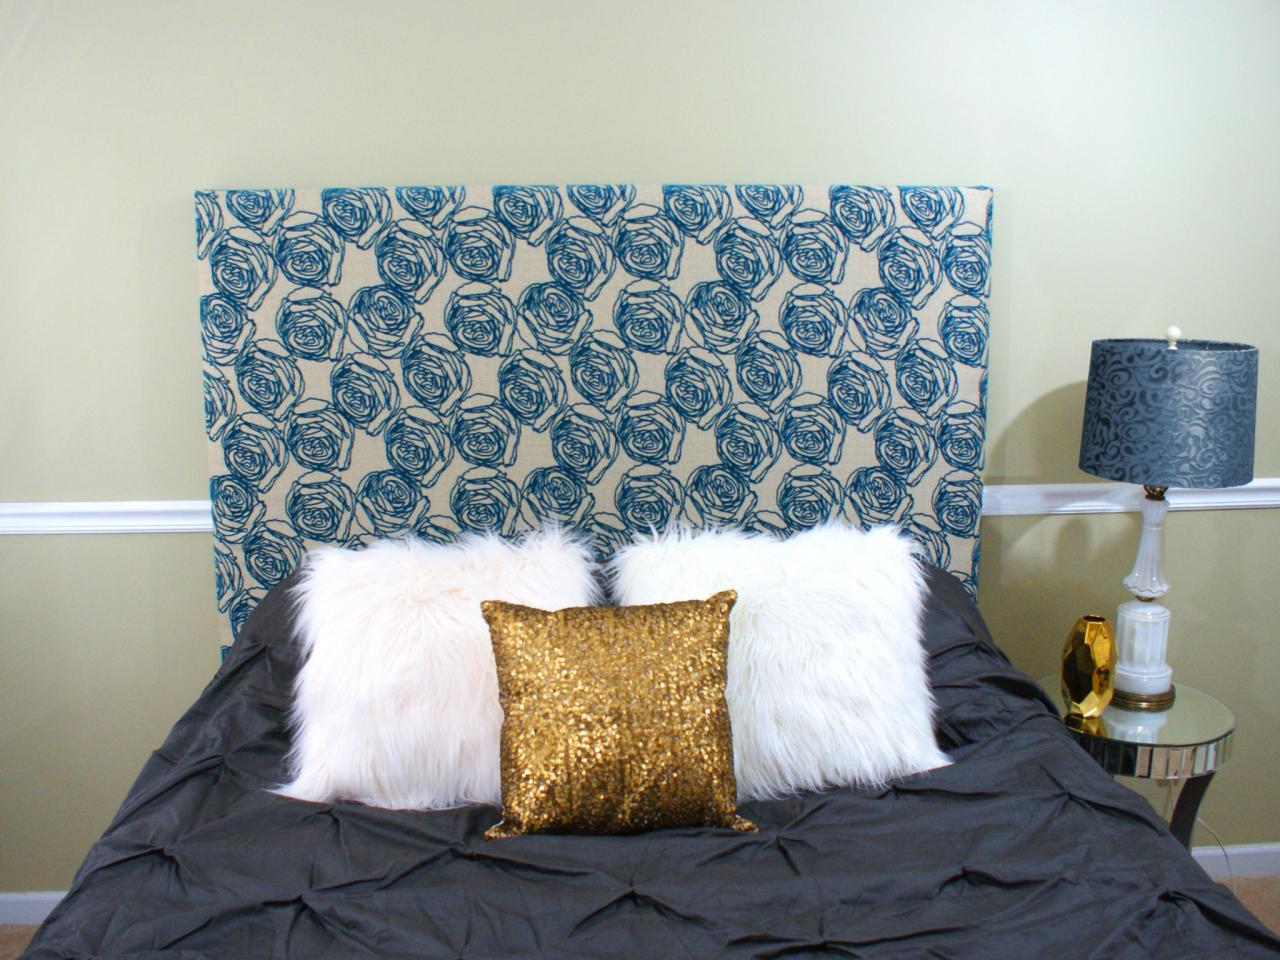 How To Upholster A Headboard For, How To Make A Headboard For King Size Bed